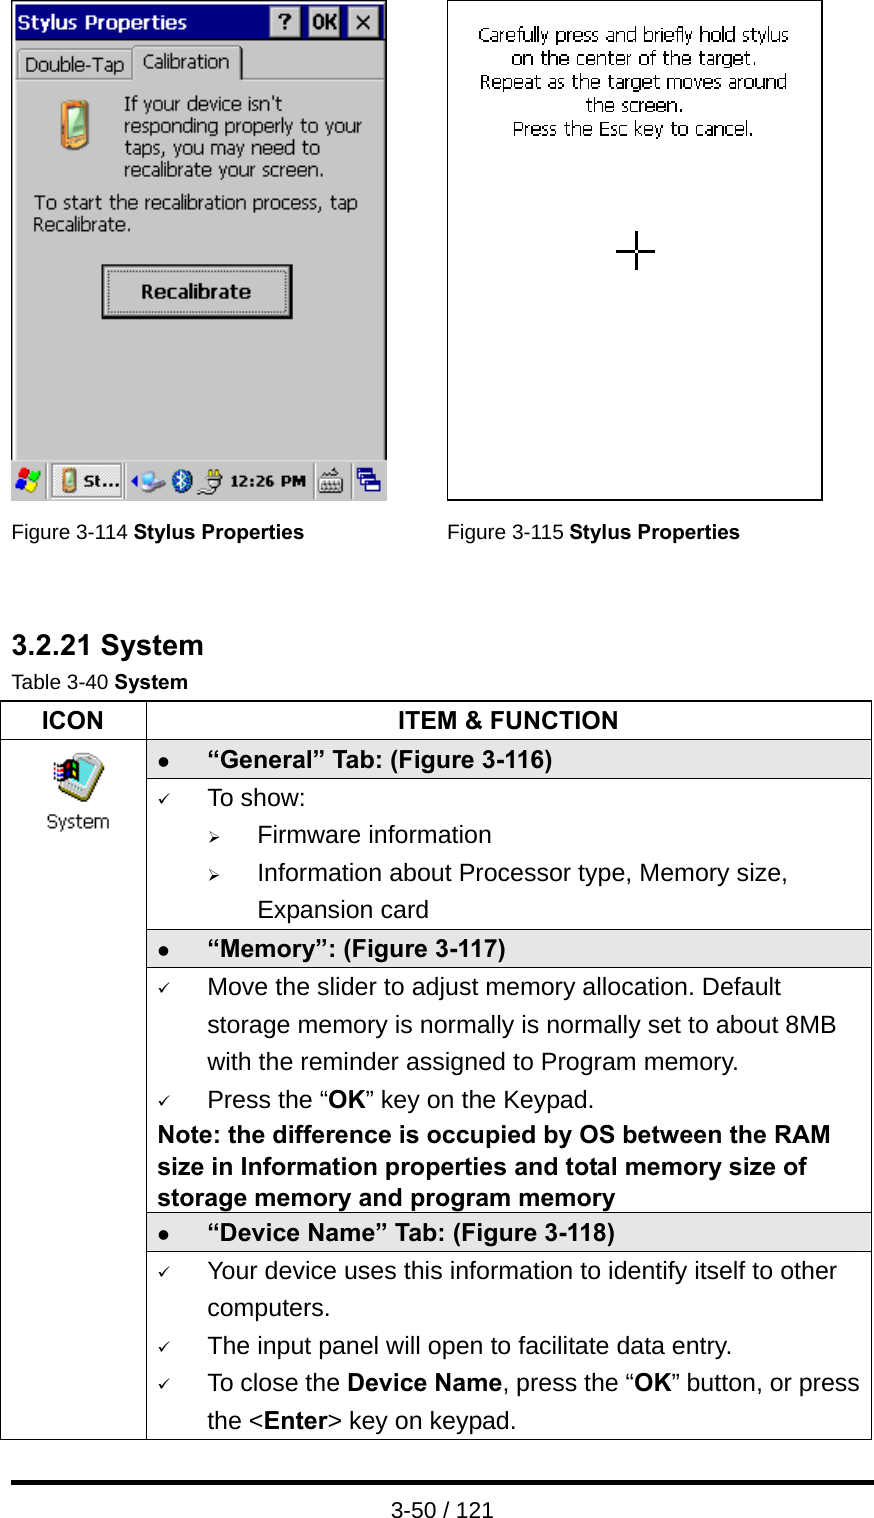  3-50 / 121    Figure 3-114 Stylus Properties Figure 3-115 Stylus Properties   3.2.21 System Table 3-40 System ICON  ITEM &amp; FUNCTION z “General” Tab: (Figure 3-116) 9 To show: ¾ Firmware information   ¾ Information about Processor type, Memory size, Expansion card z “Memory”: (Figure 3-117) 9 Move the slider to adjust memory allocation. Default storage memory is normally is normally set to about 8MB with the reminder assigned to Program memory. 9 Press the “OK” key on the Keypad.   Note: the difference is occupied by OS between the RAM size in Information properties and total memory size of storage memory and program memory   z “Device Name” Tab: (Figure 3-118)                 9 Your device uses this information to identify itself to other computers. 9 The input panel will open to facilitate data entry. 9 To close the Device Name, press the “OK” button, or press the &lt;Enter&gt; key on keypad. 